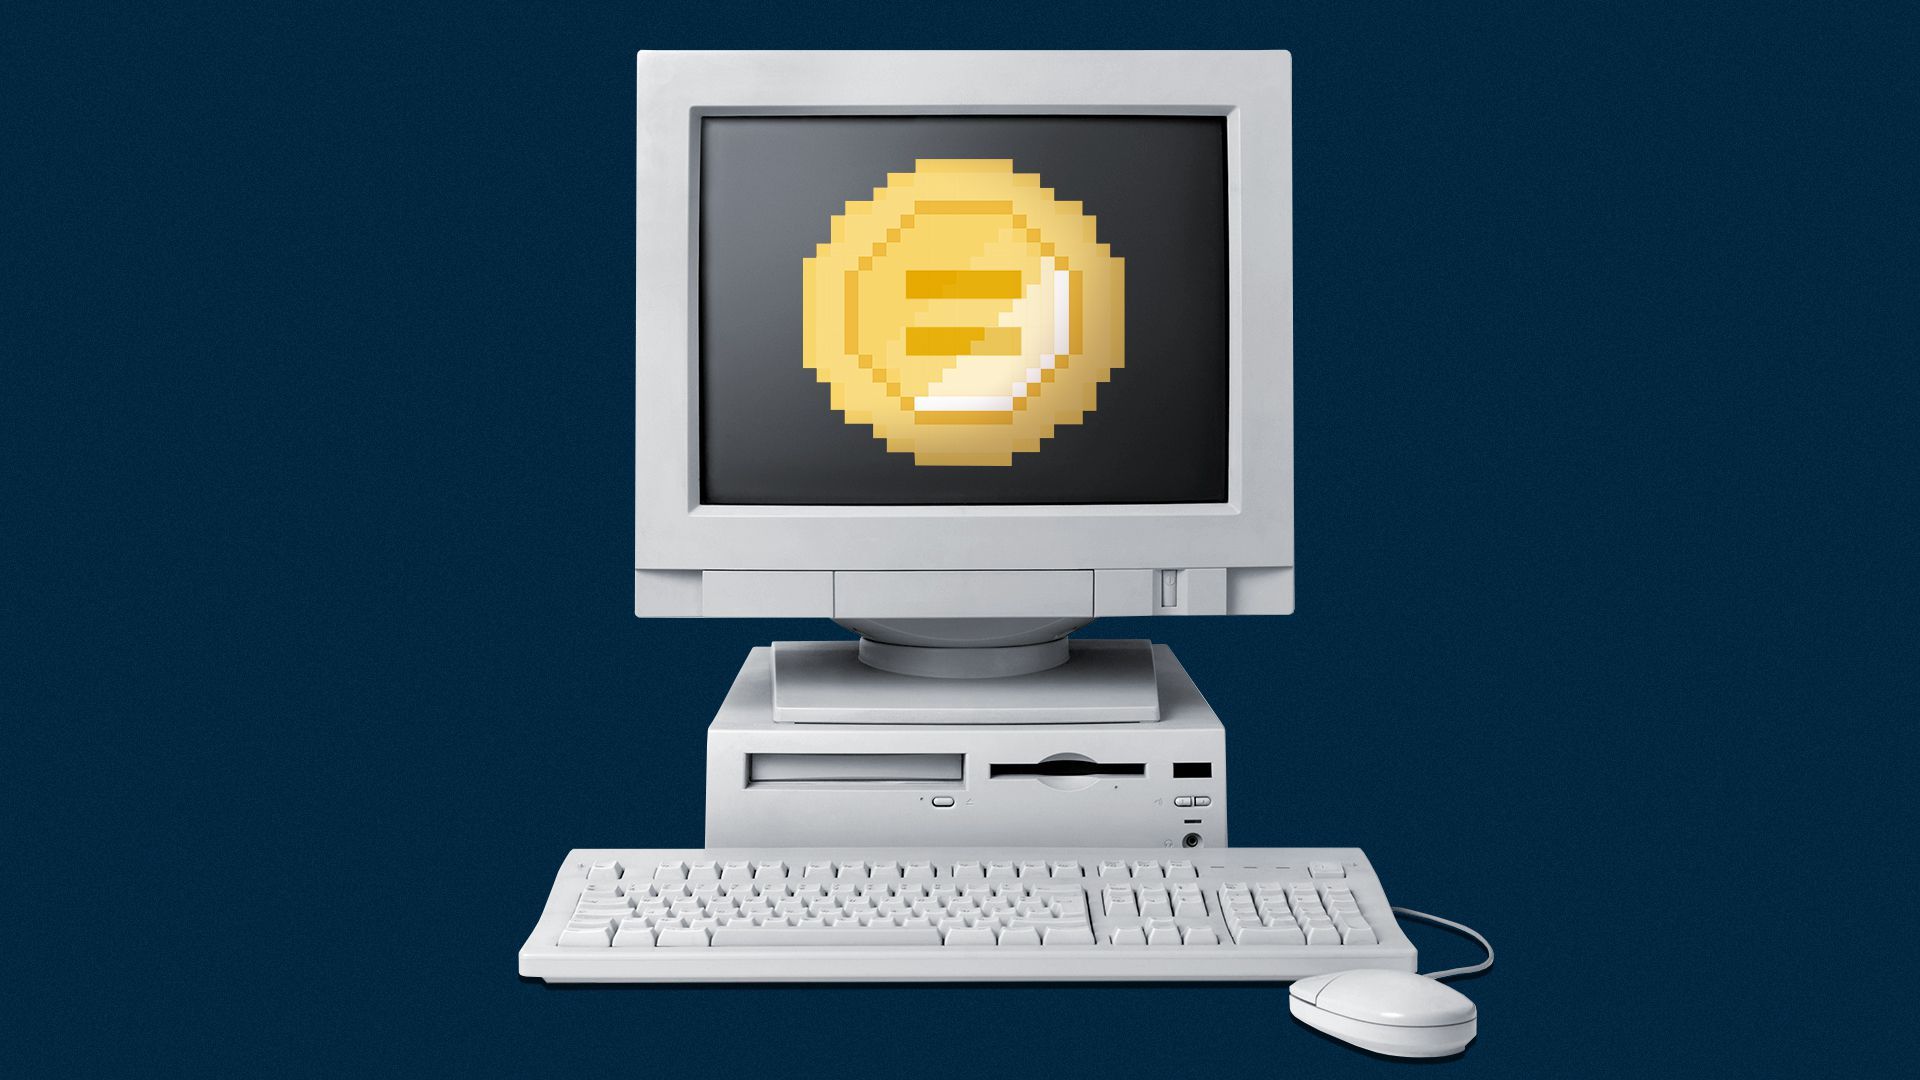 Illustration of a computer screen showing a pixelated coin with the SoftBank logo